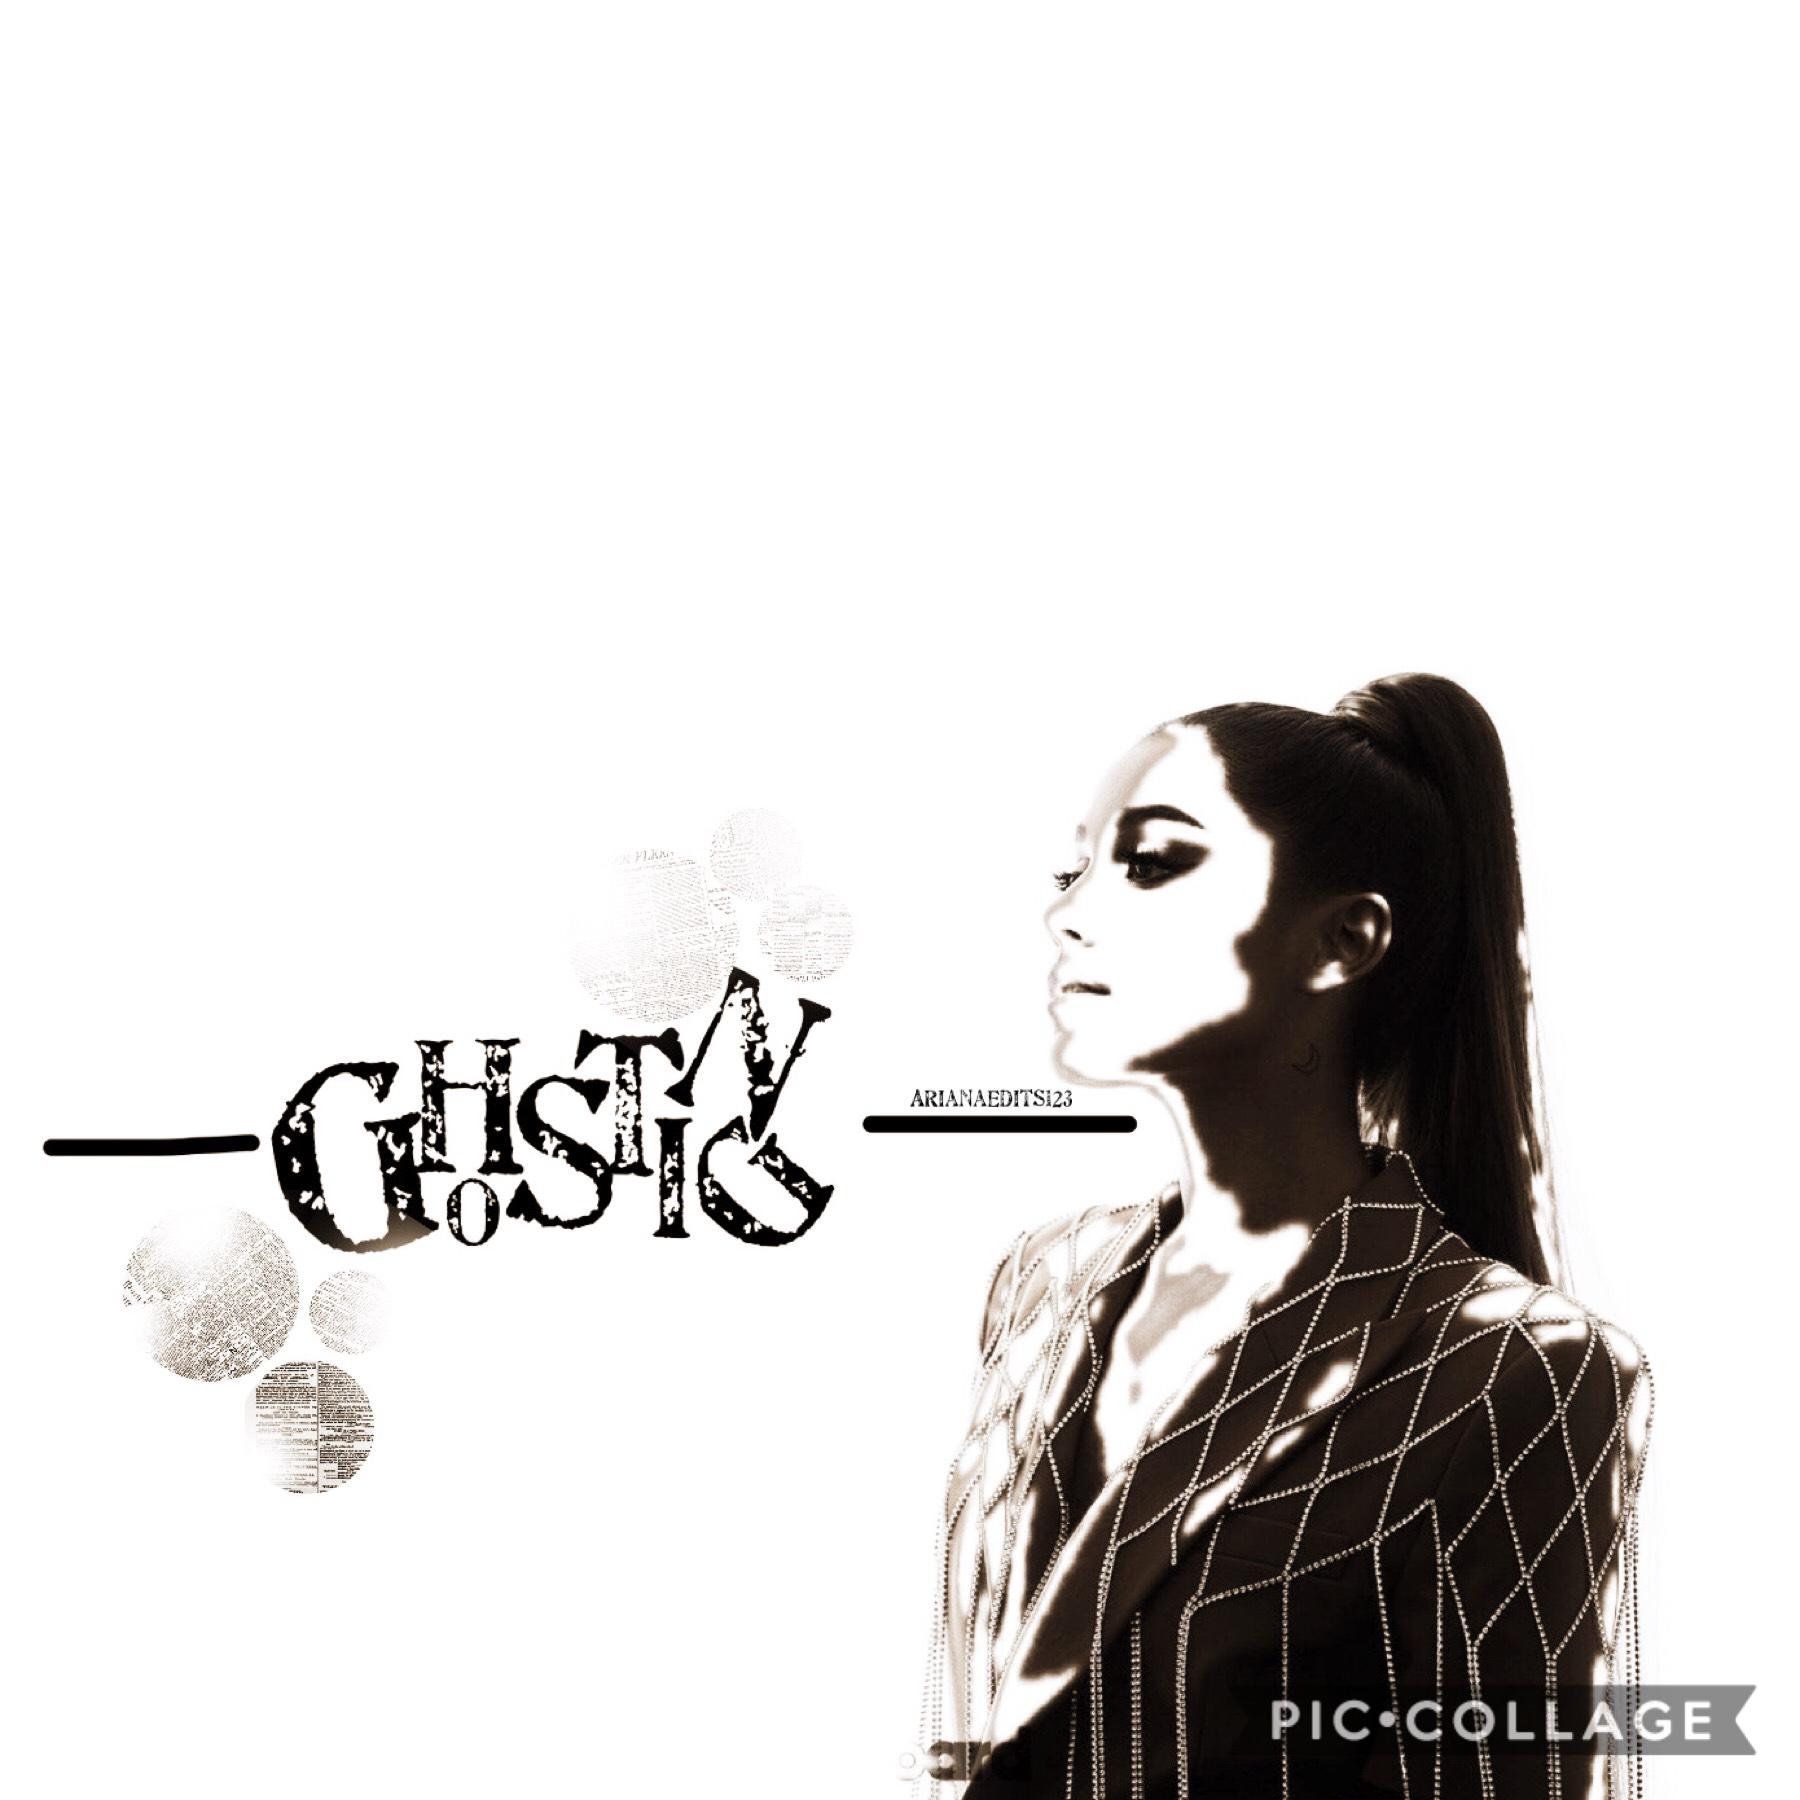 Tap
This is super simple
I had another collage idea but when I cutout ari this happened and I thought it was kinda cool so yeah
Bye